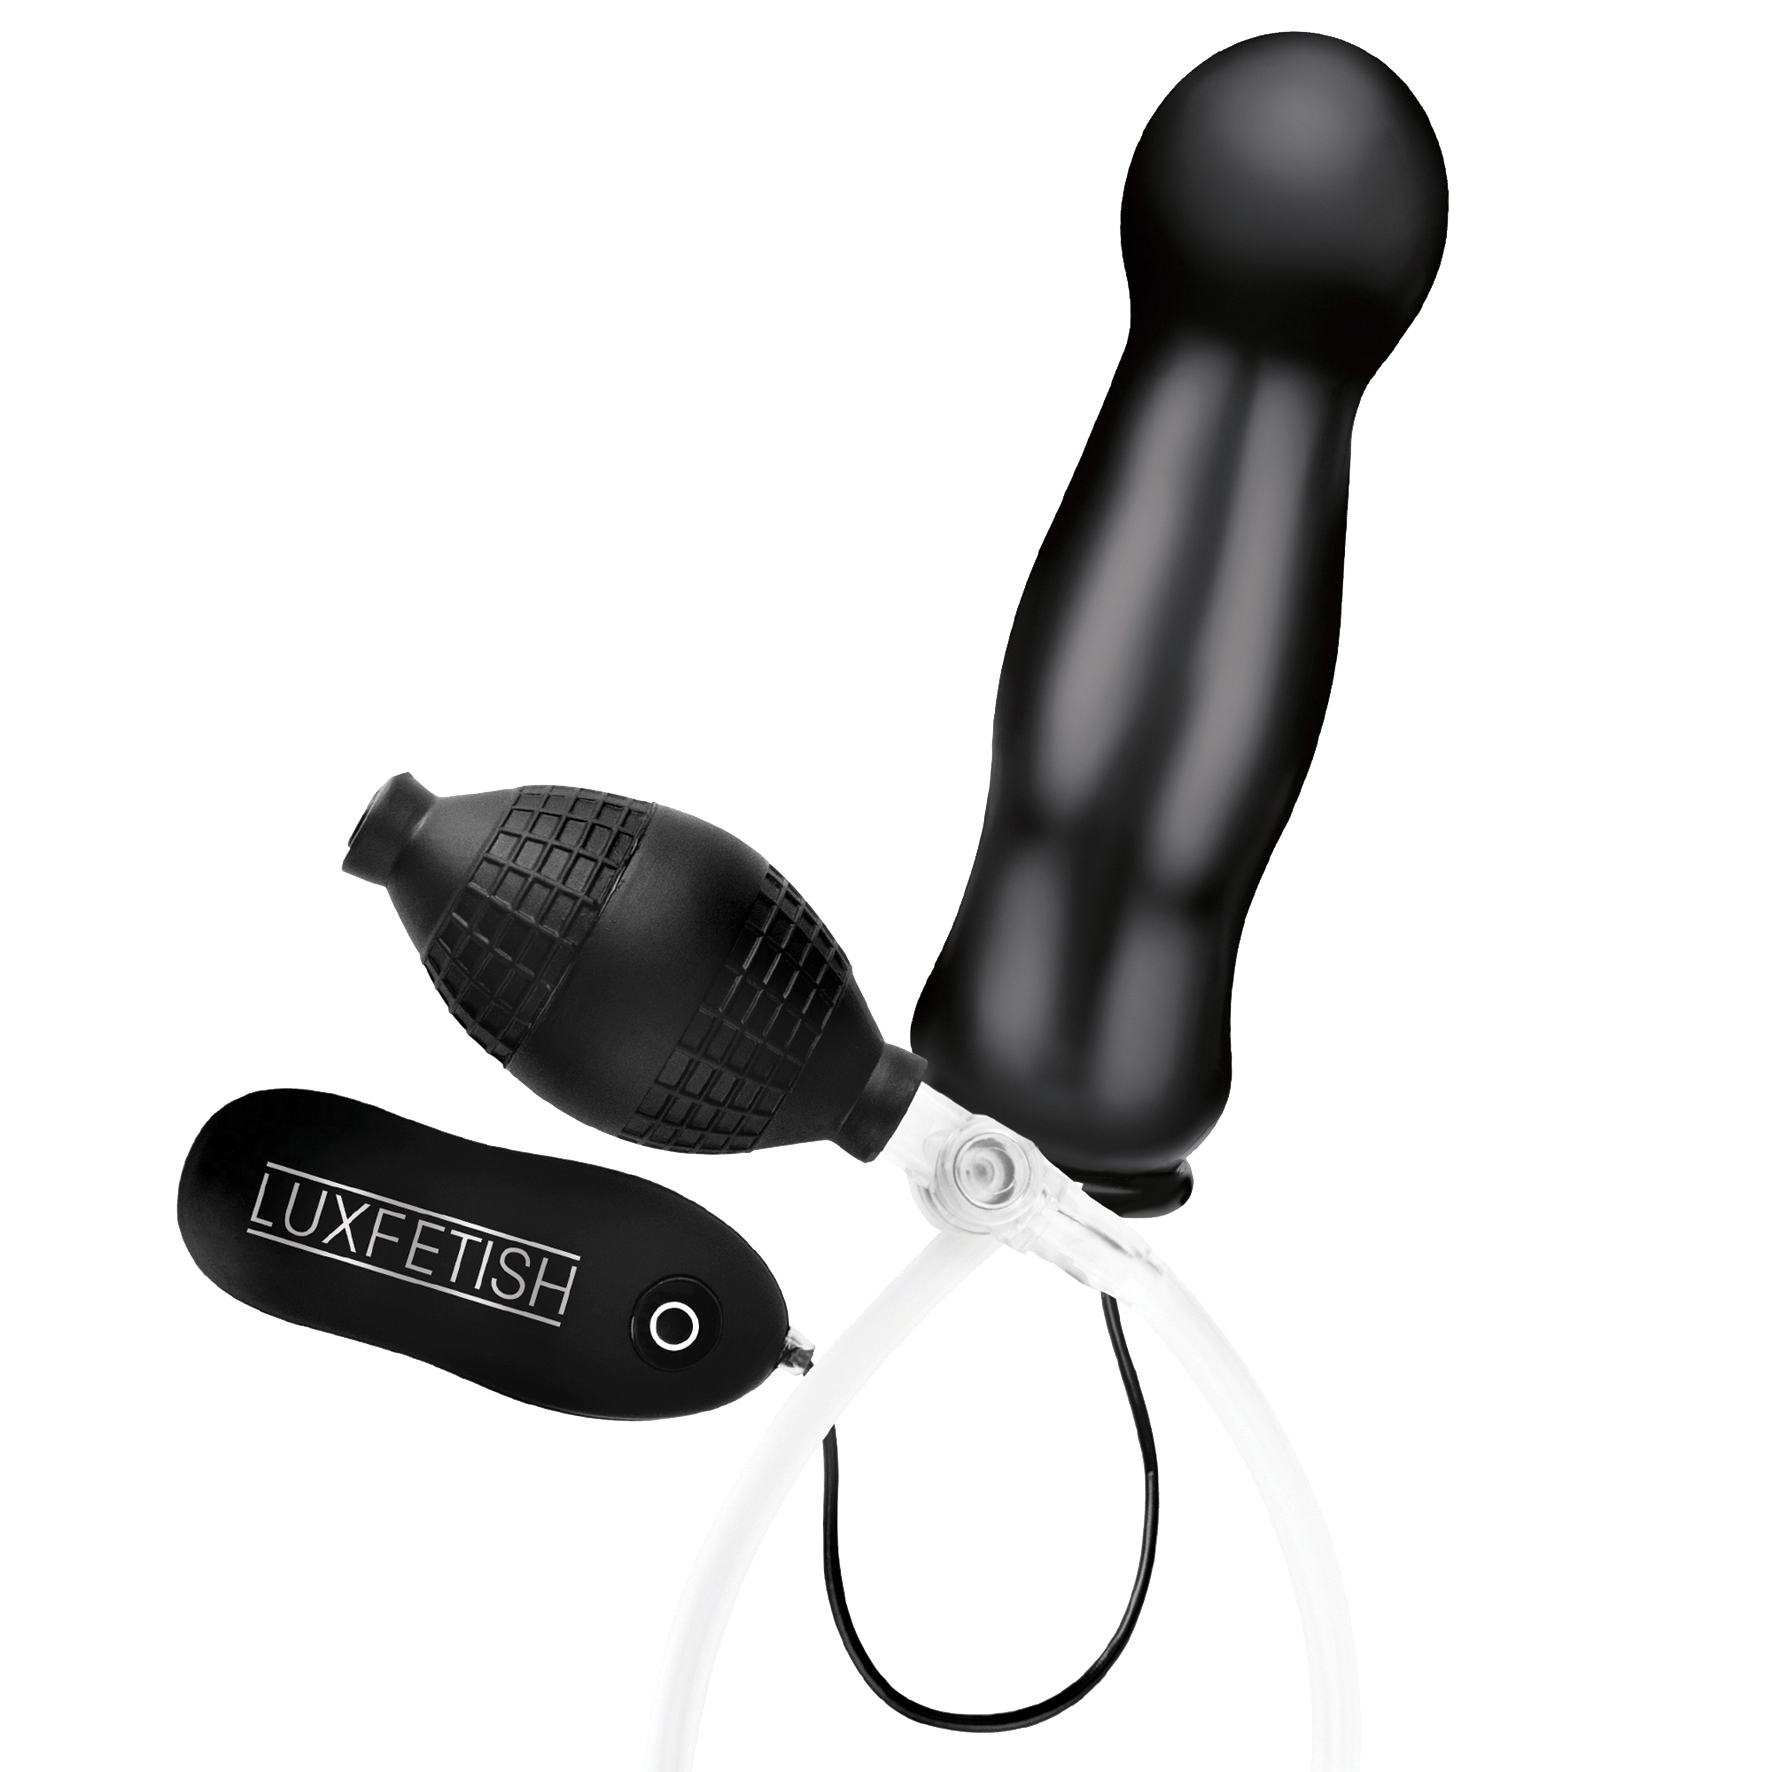 LUX FETISH 4,5” Inflatable Vibrating Butt Plug